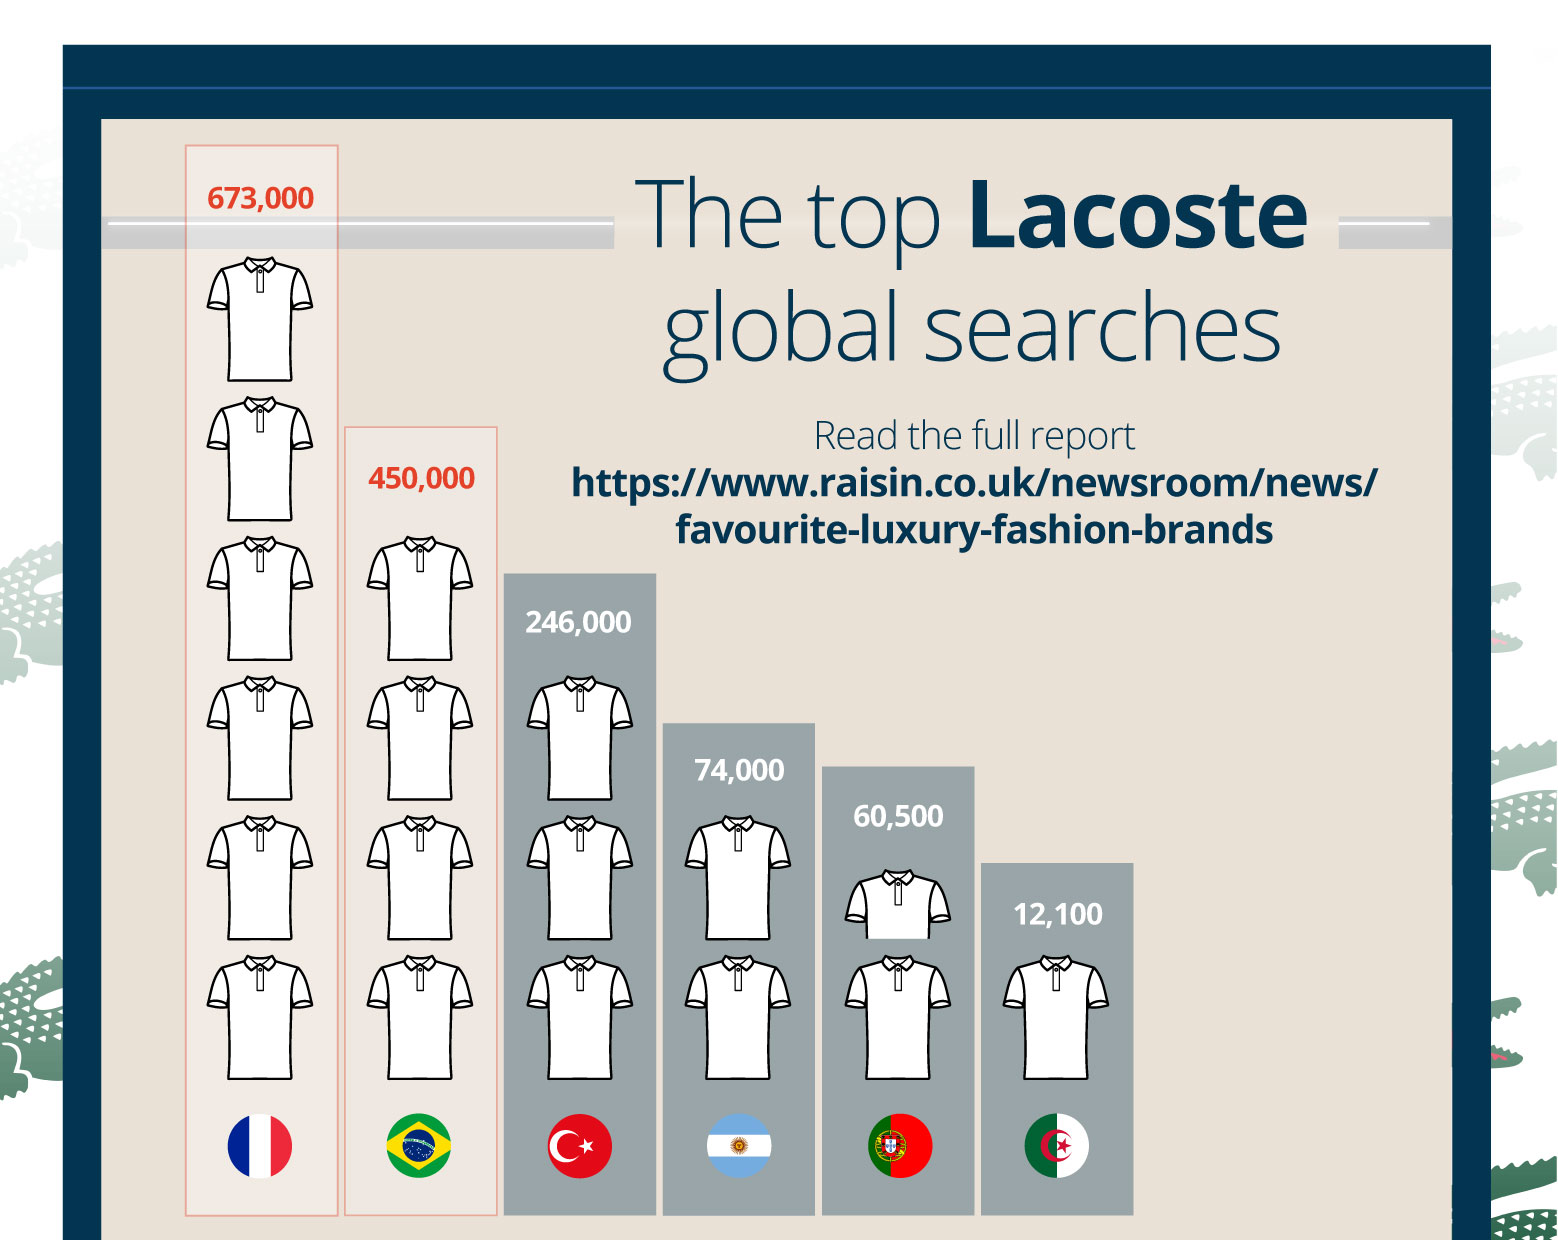 These are the most searched luxury fashion brands in the world